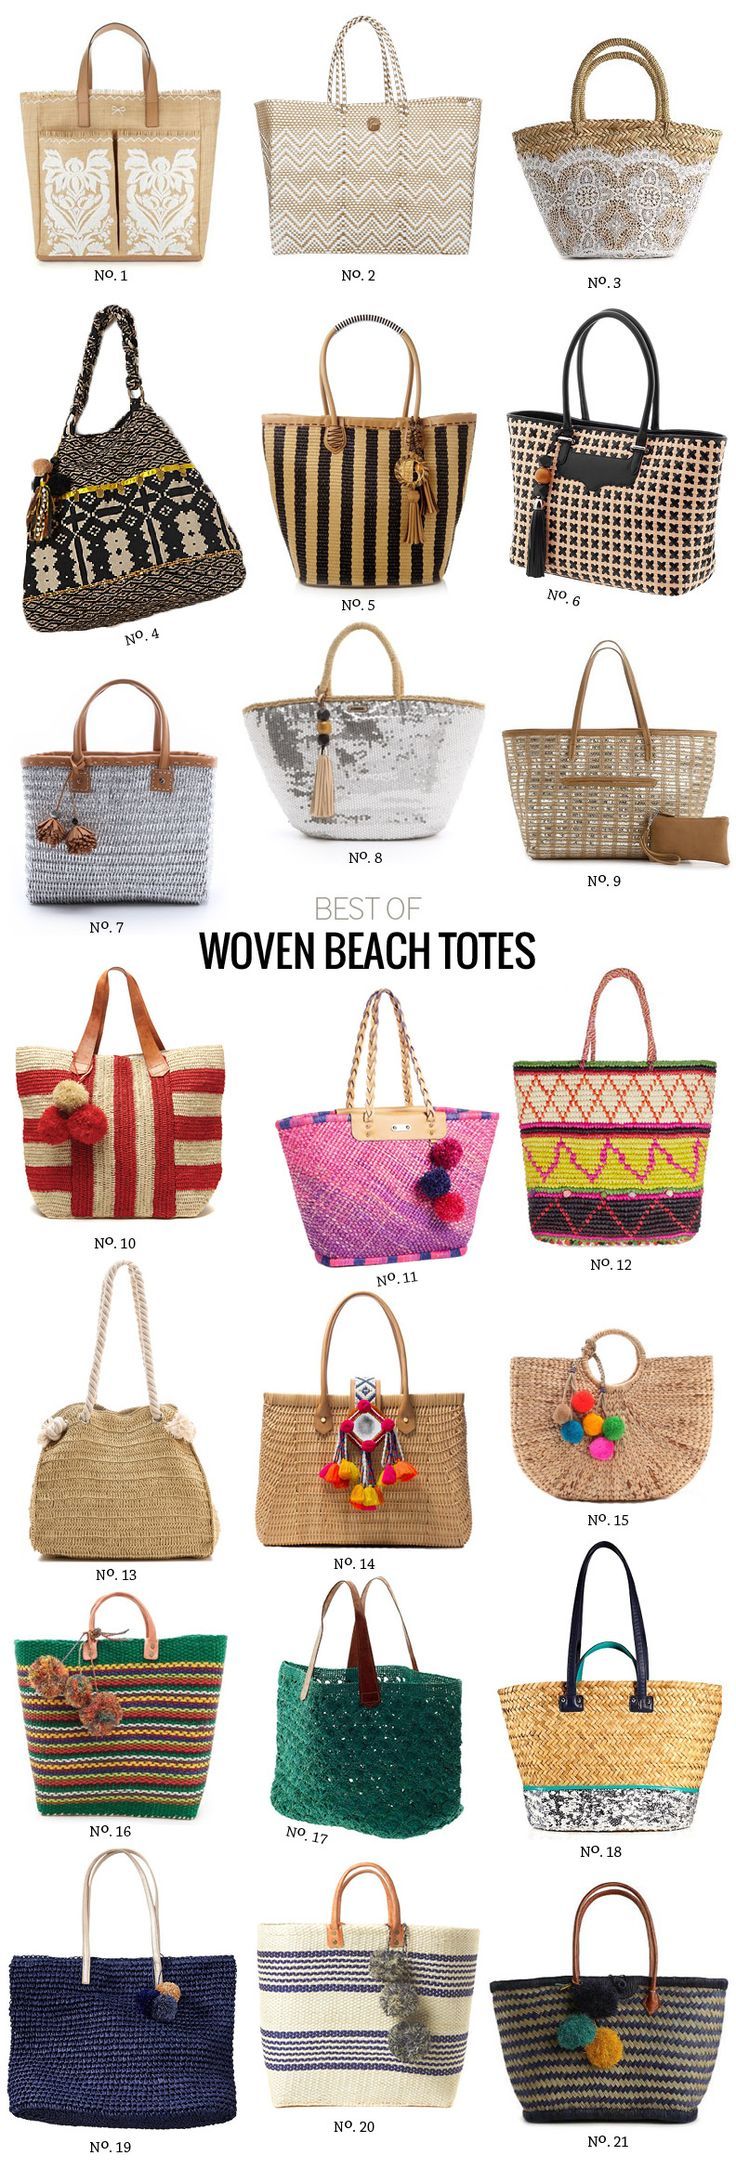 // Best Of: Woven Beach Totes by Modern Eve